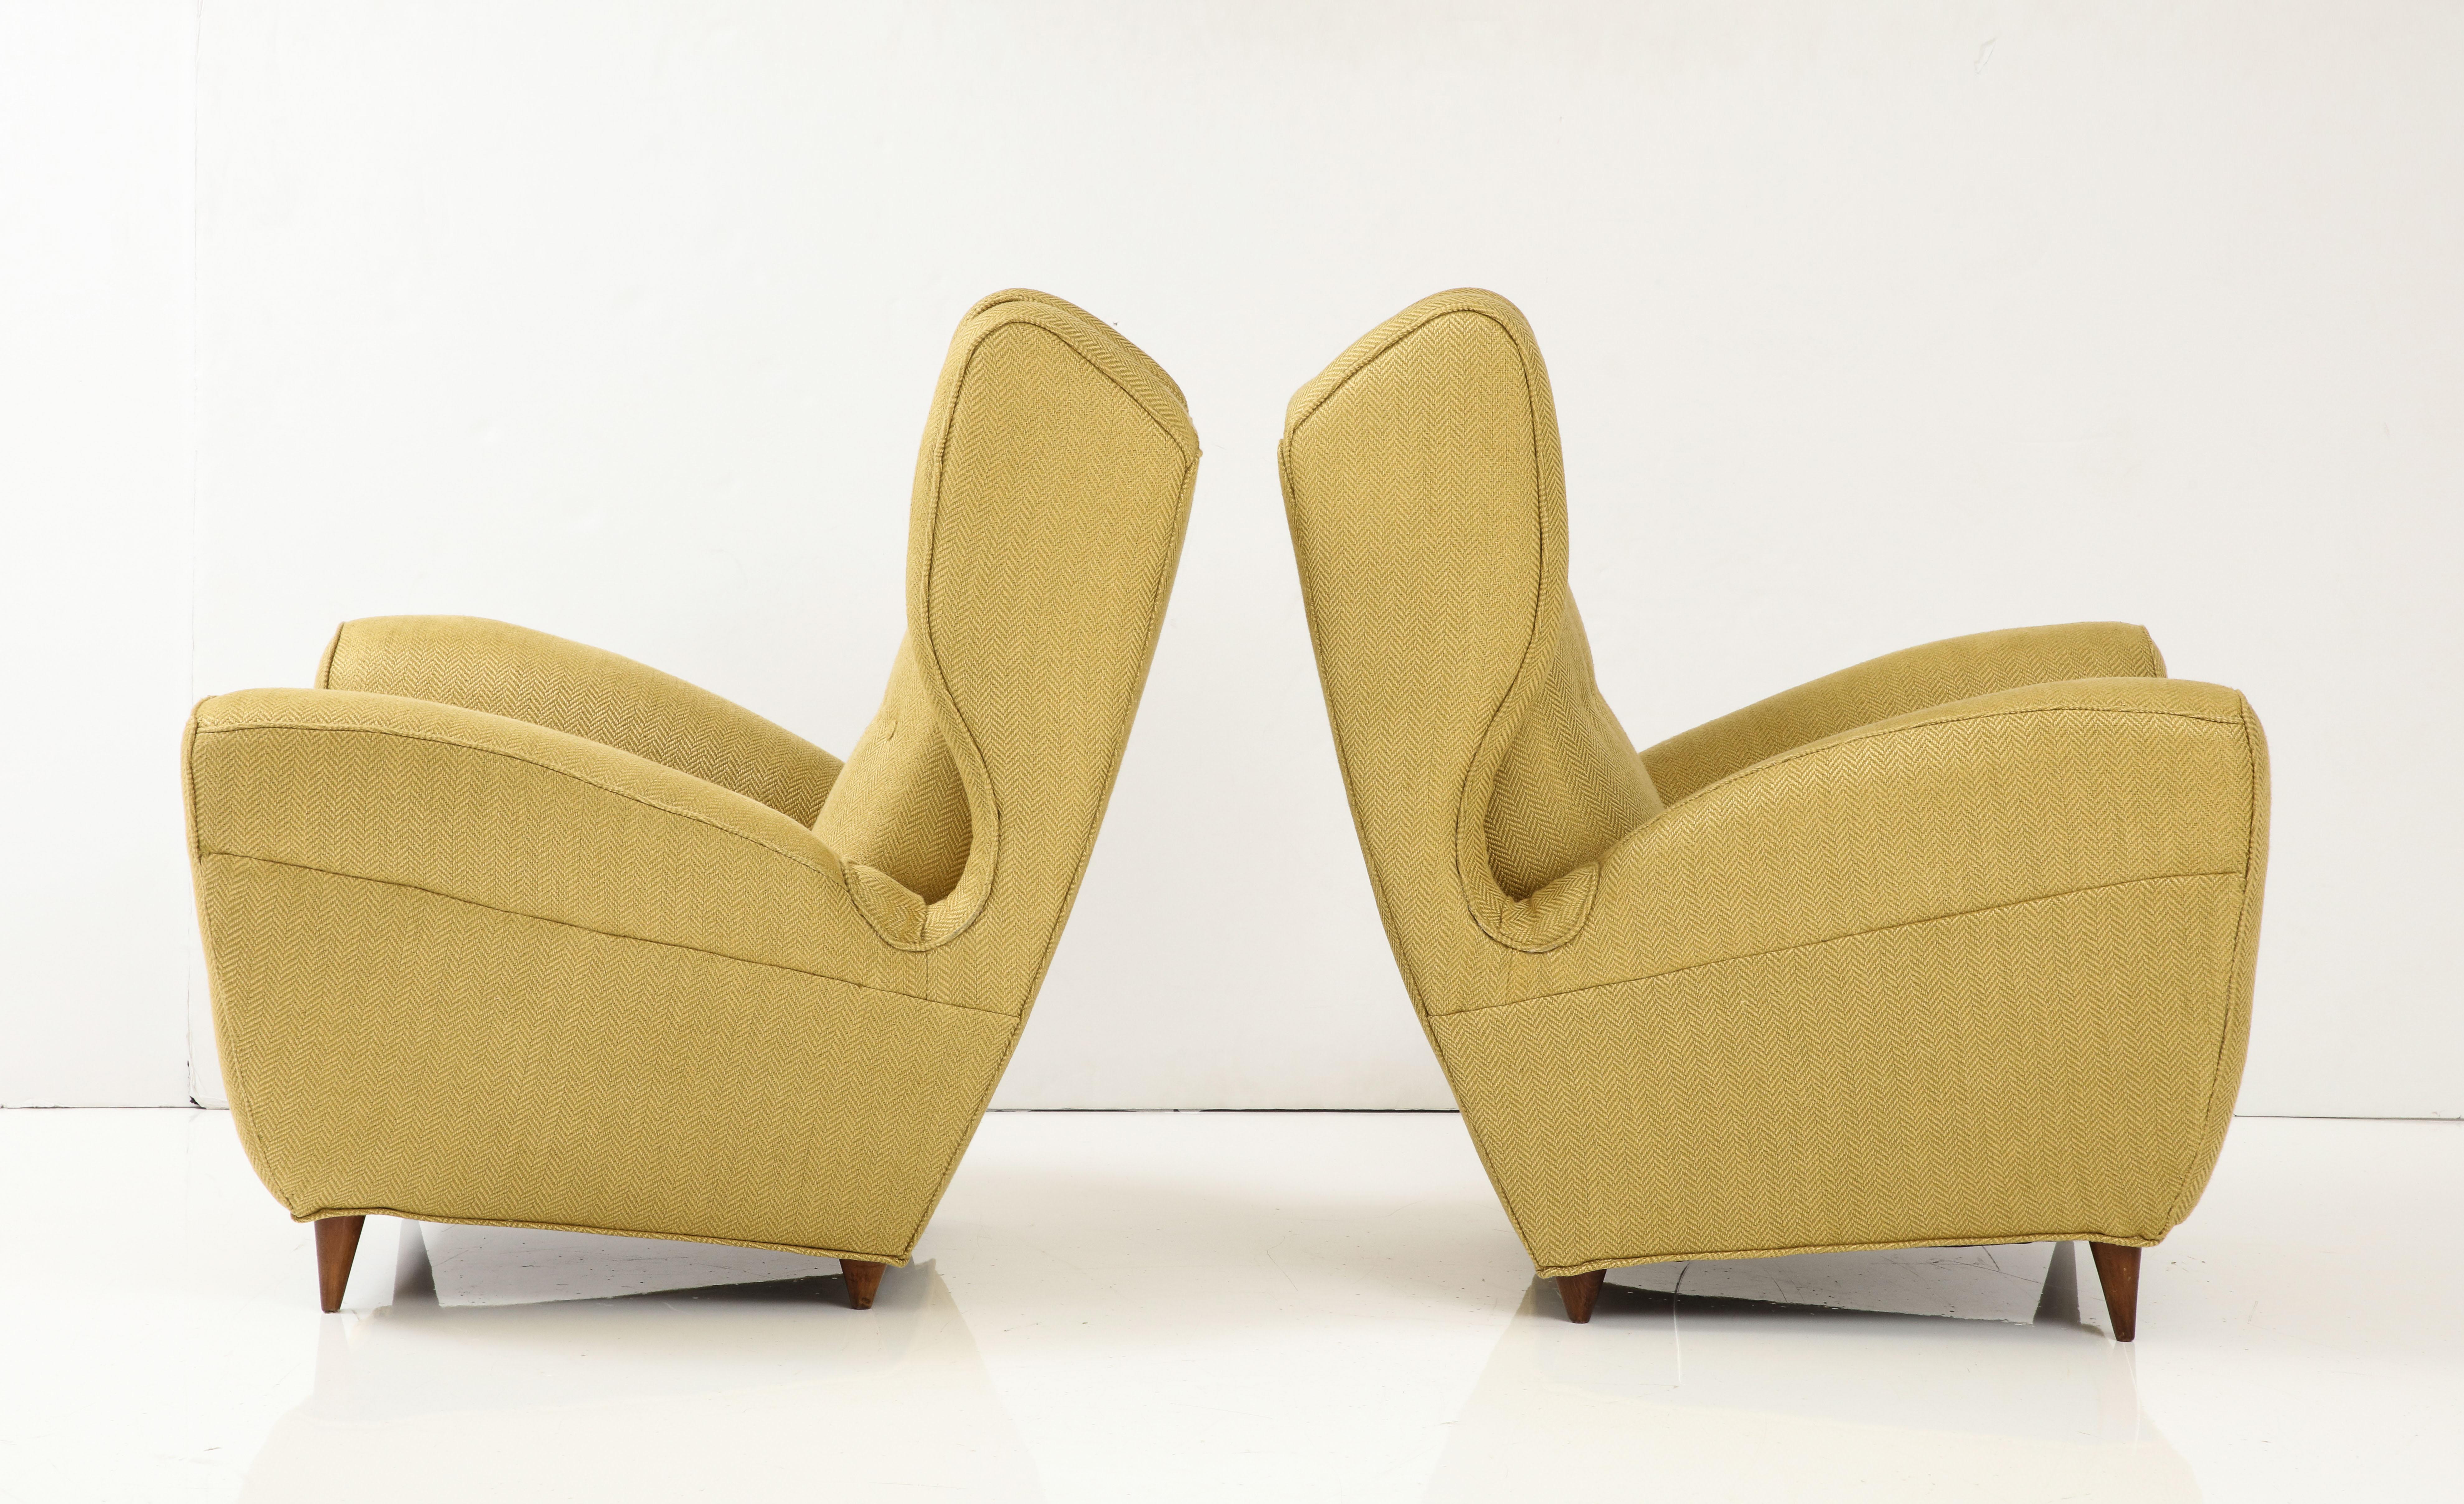 Amazing pair of large 1950's wingback lounge chairs designed by Melchiorre Bega, newly re-upholstered in linen blend Donghia fabric, with minor wear and patina due to age and use.